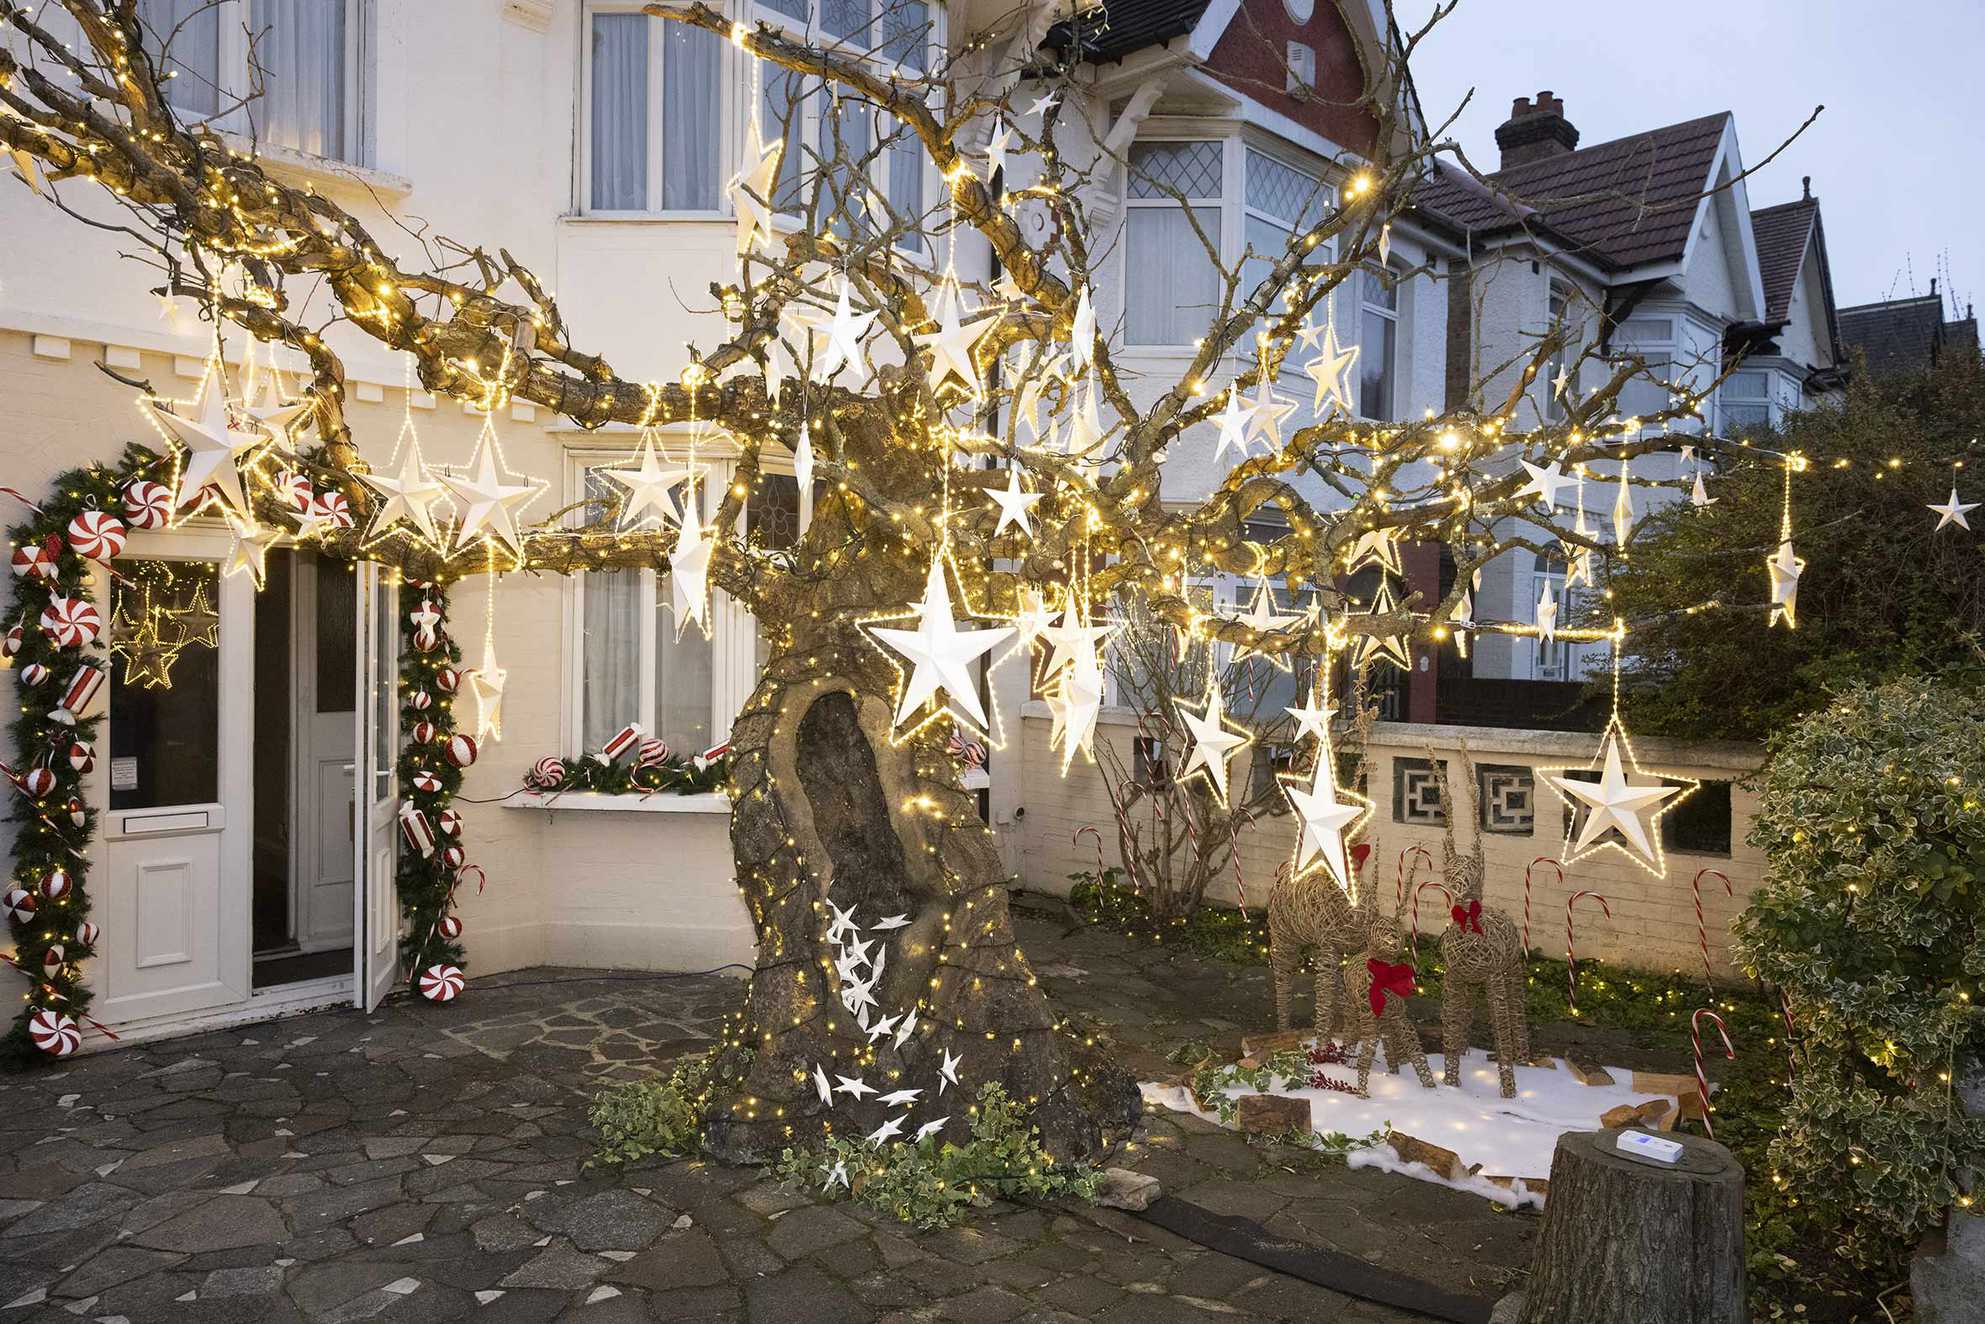 The brightly lit wish tree, outside Ellie's house - Image © Phil Harris, Daily Mirror.